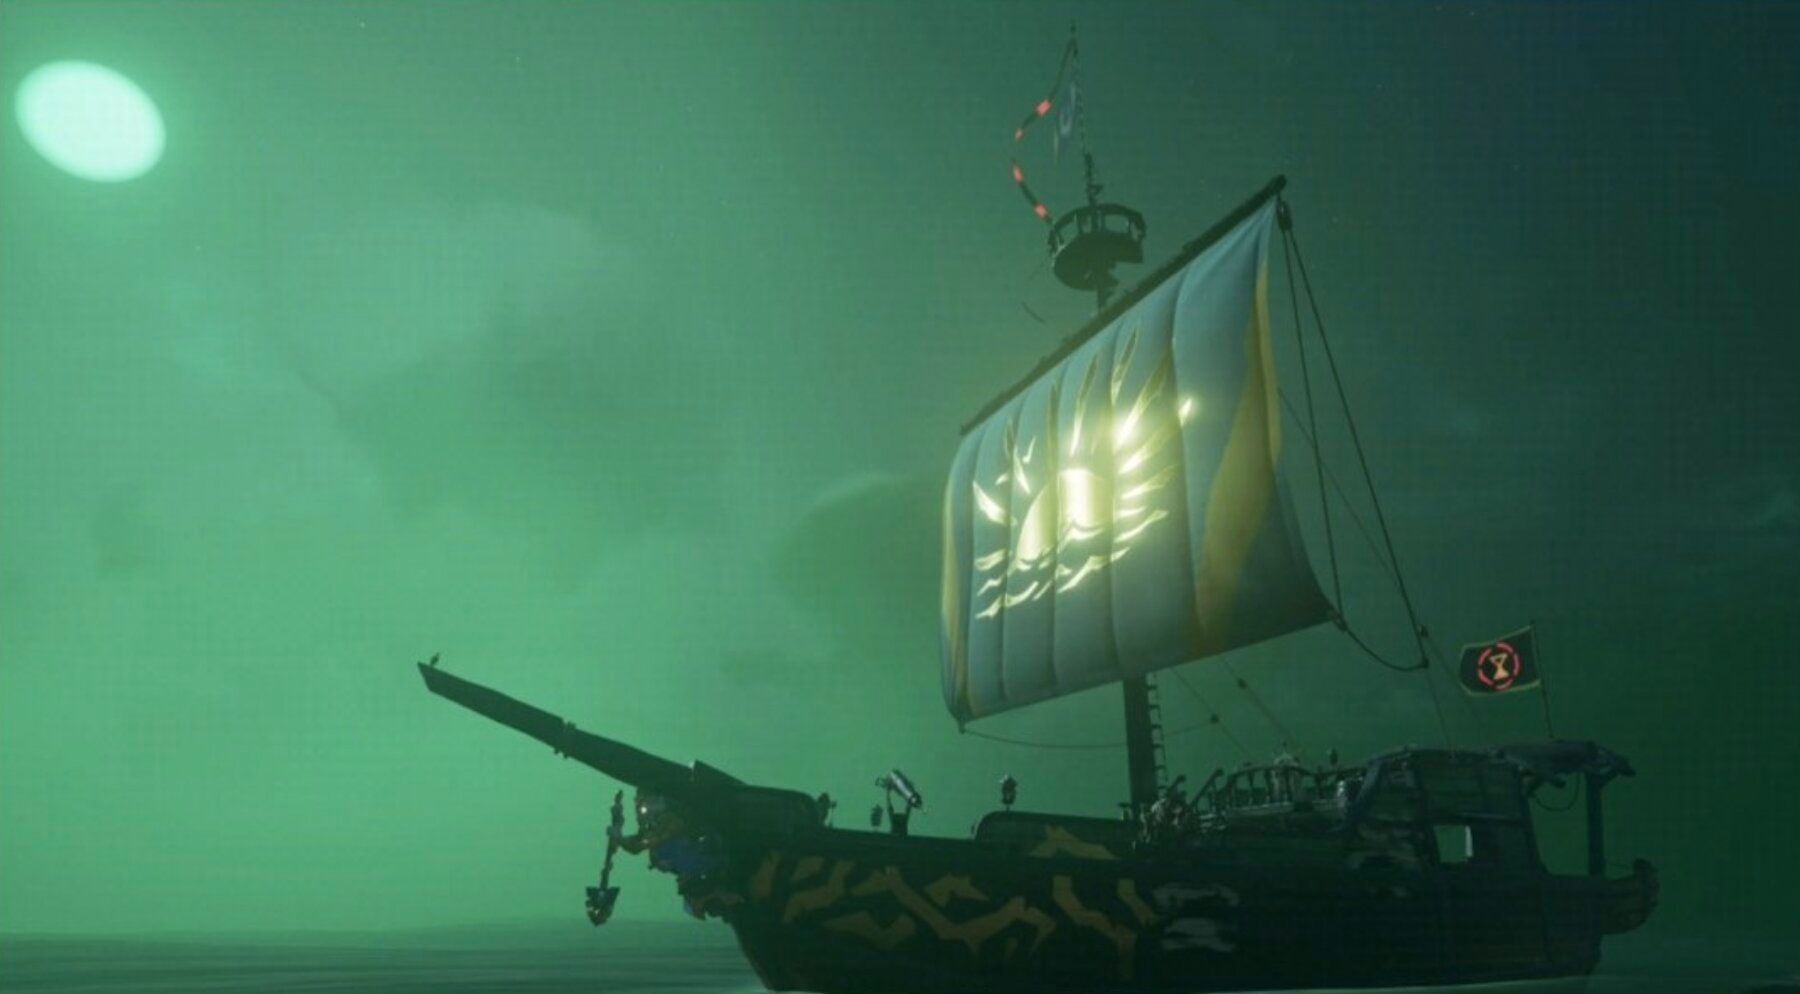 Sea of Thieves 2022 Roadmap Revealed